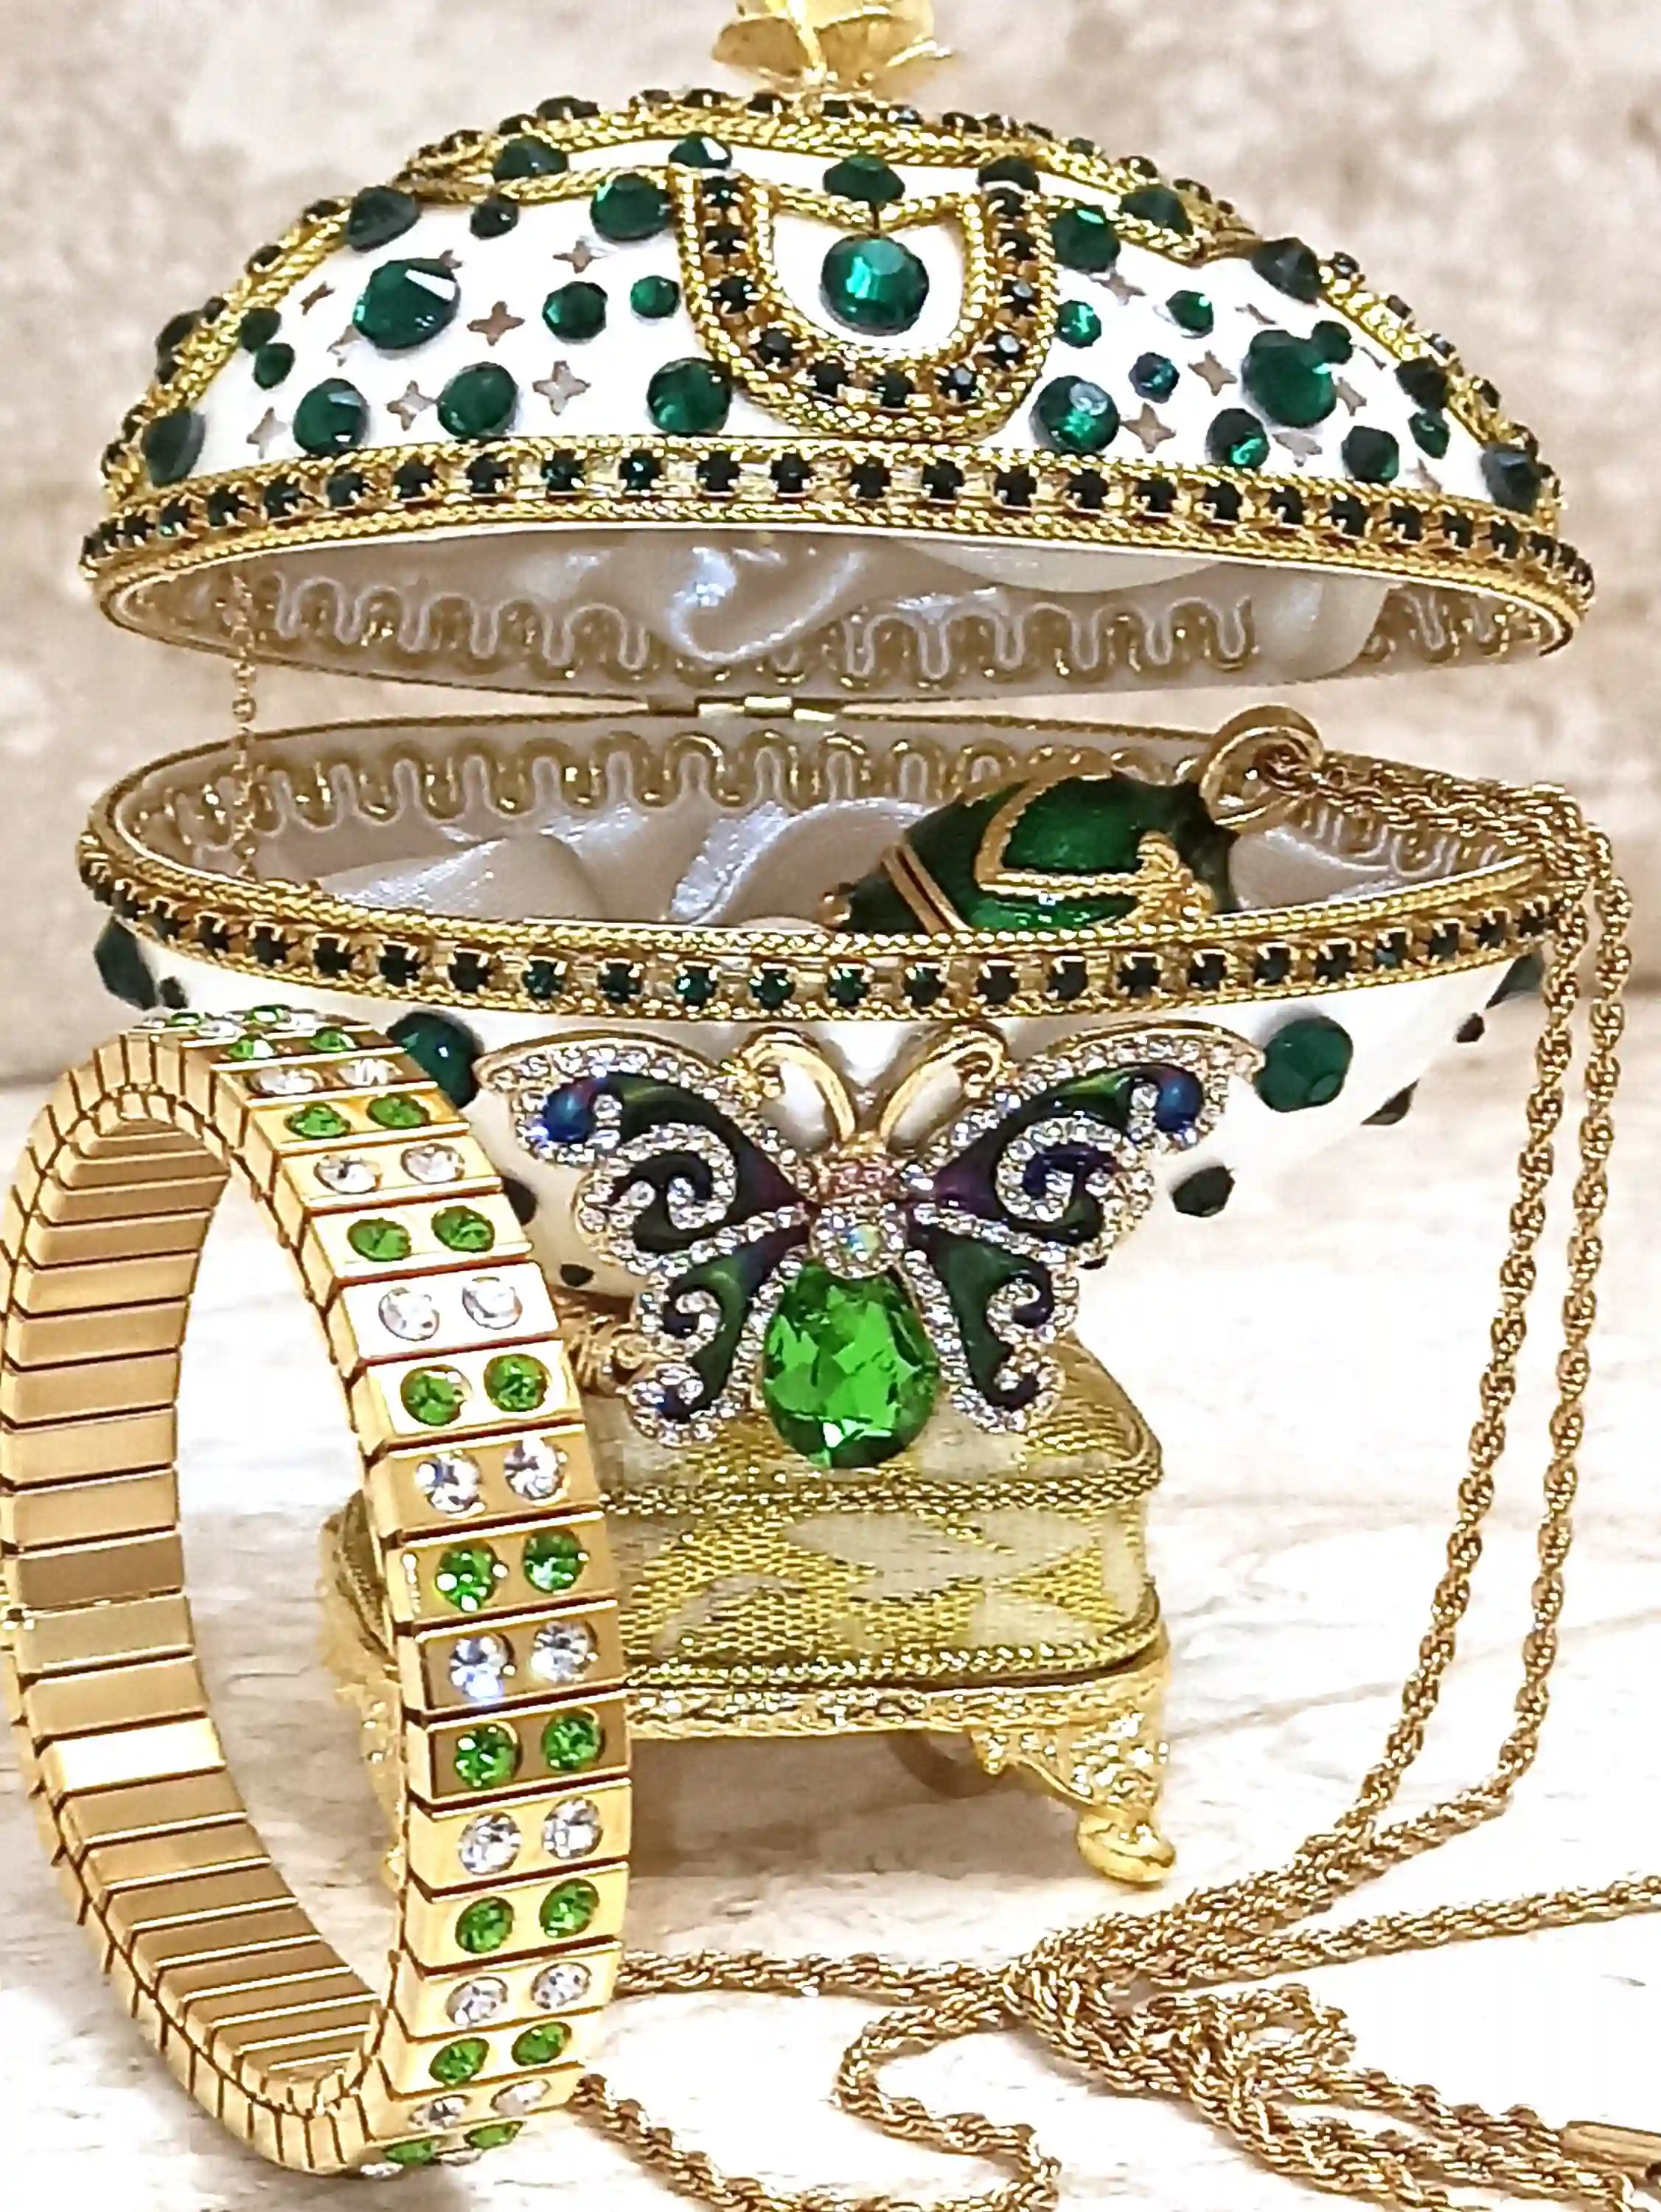 One Of a Kind Faberge Egg Jewelry Box SET Musical Emerald Butterfly Trinket Box Home Decor Fabrege Egg NATURAL Hand Crafted Egg 24kGOLD deco 